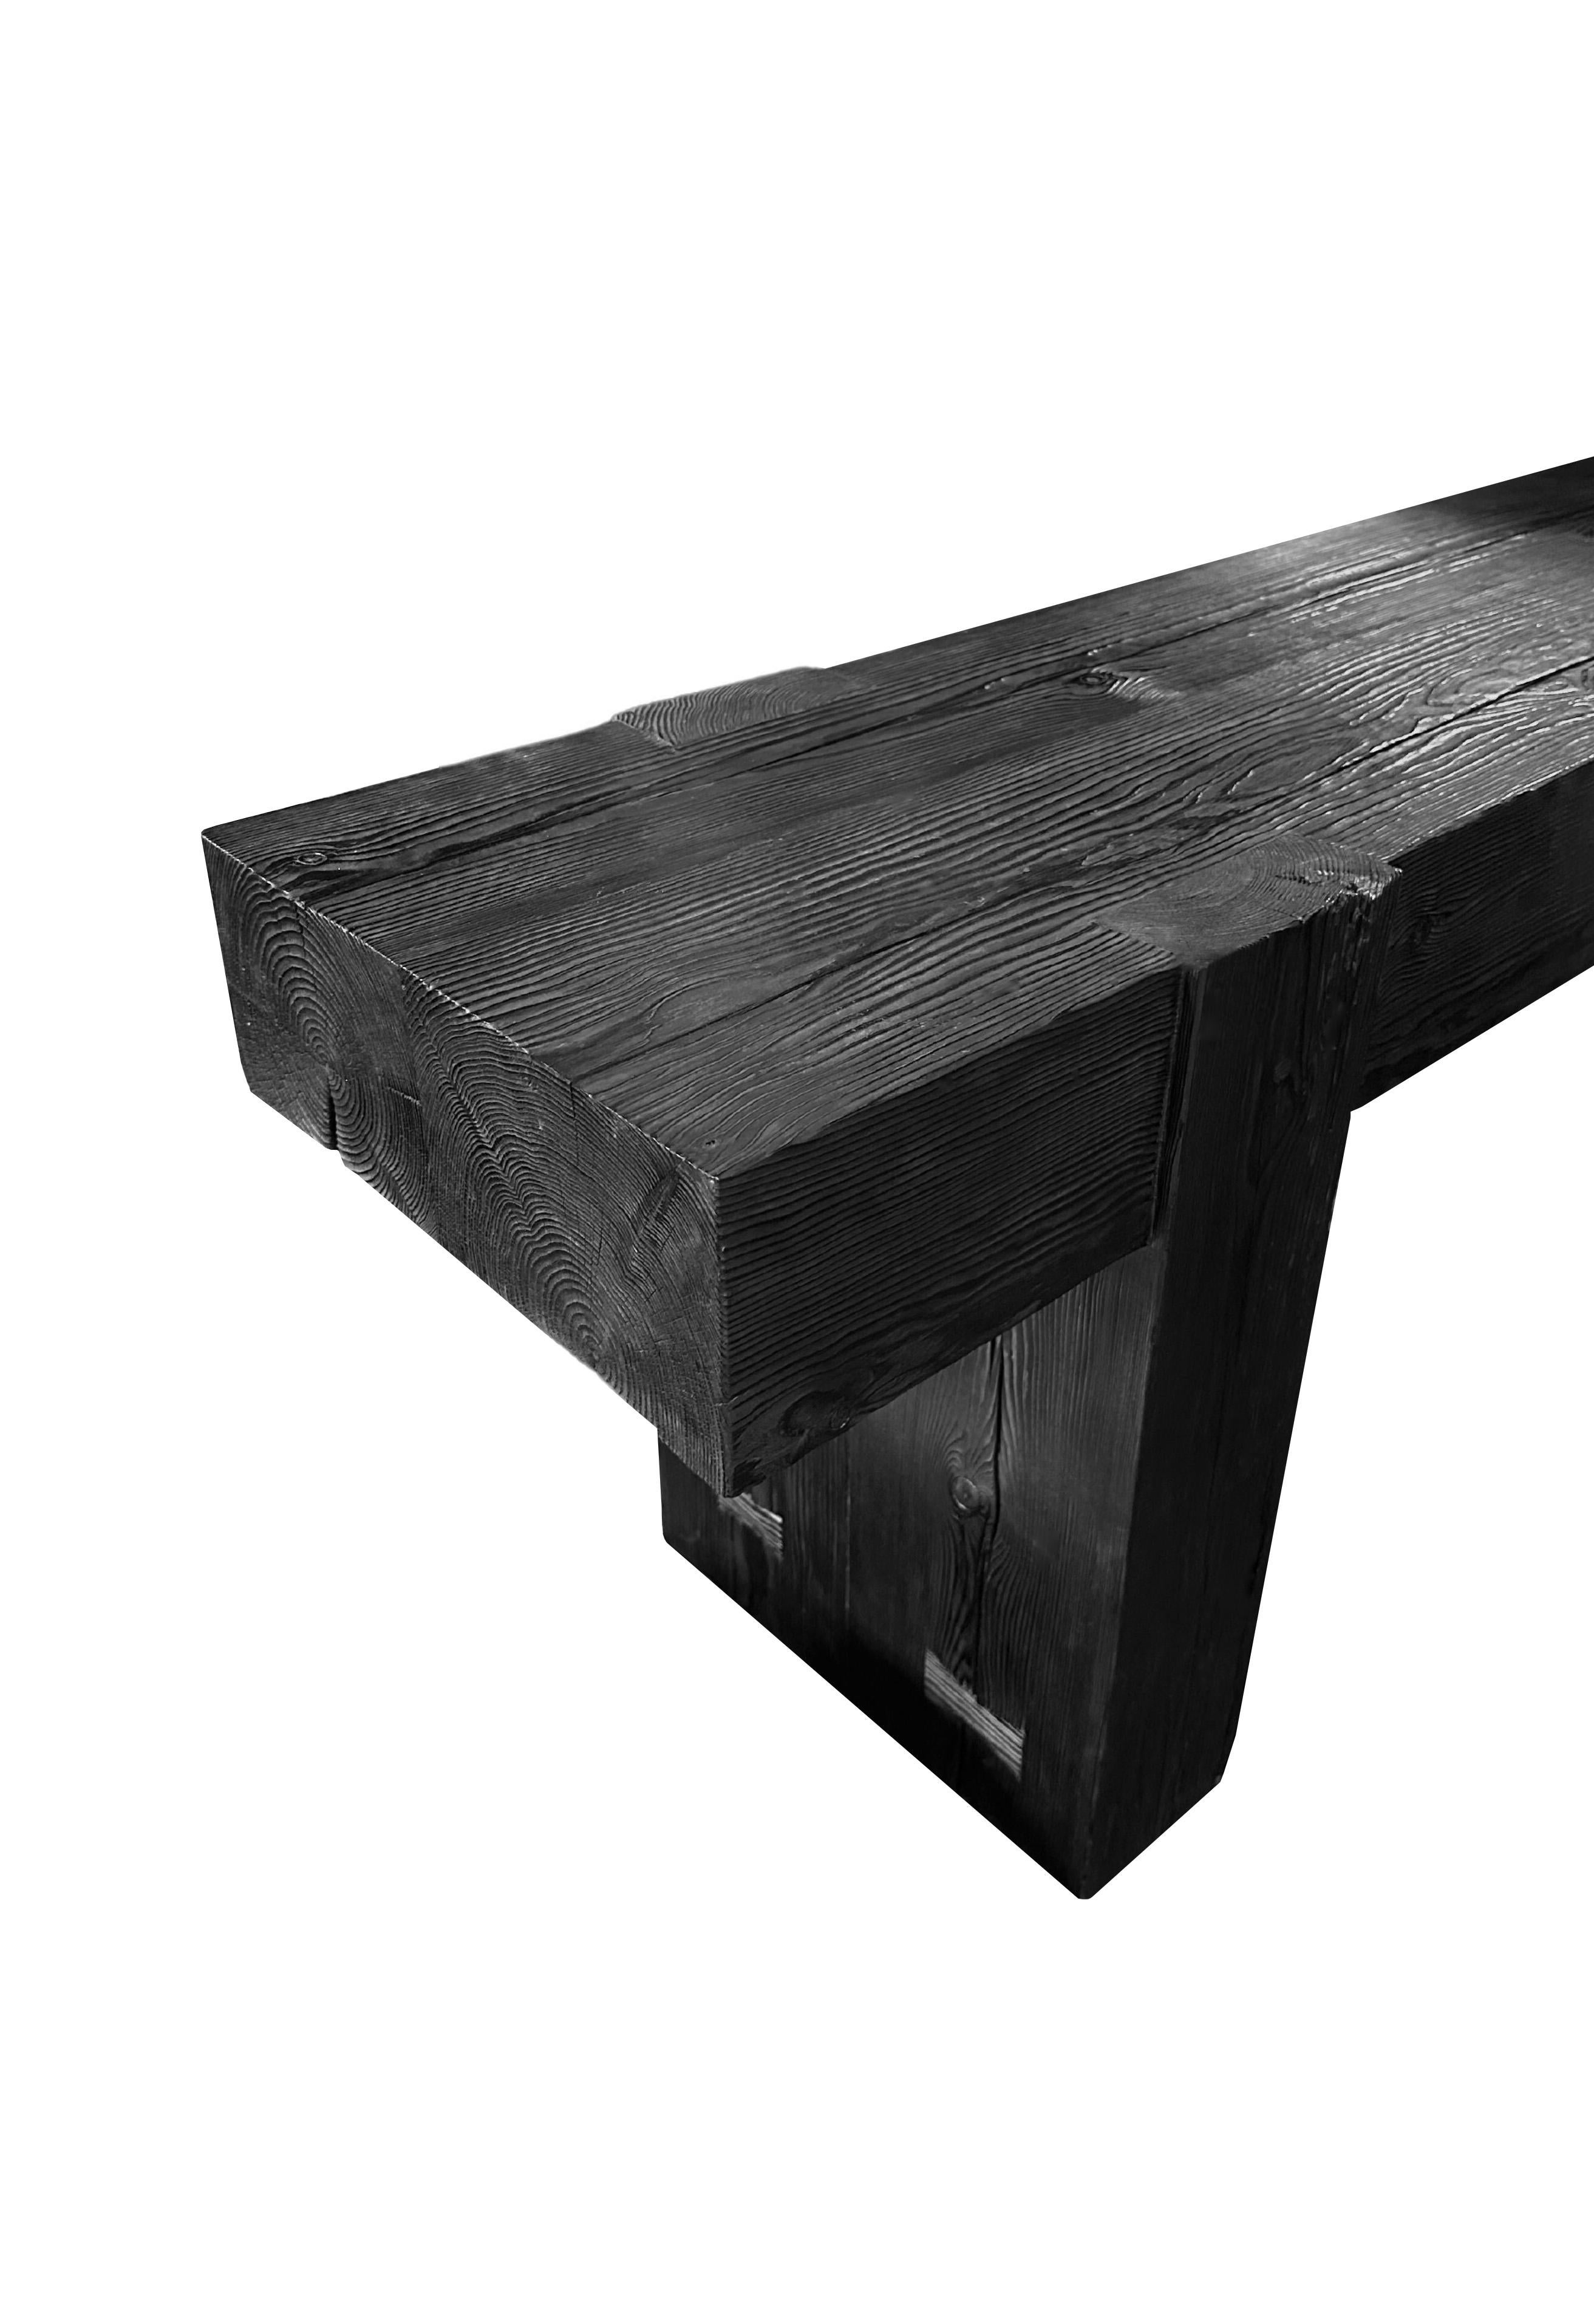 Indonesian Solid Teak Wood Console Table, Burnt Finish Modern Organic For Sale